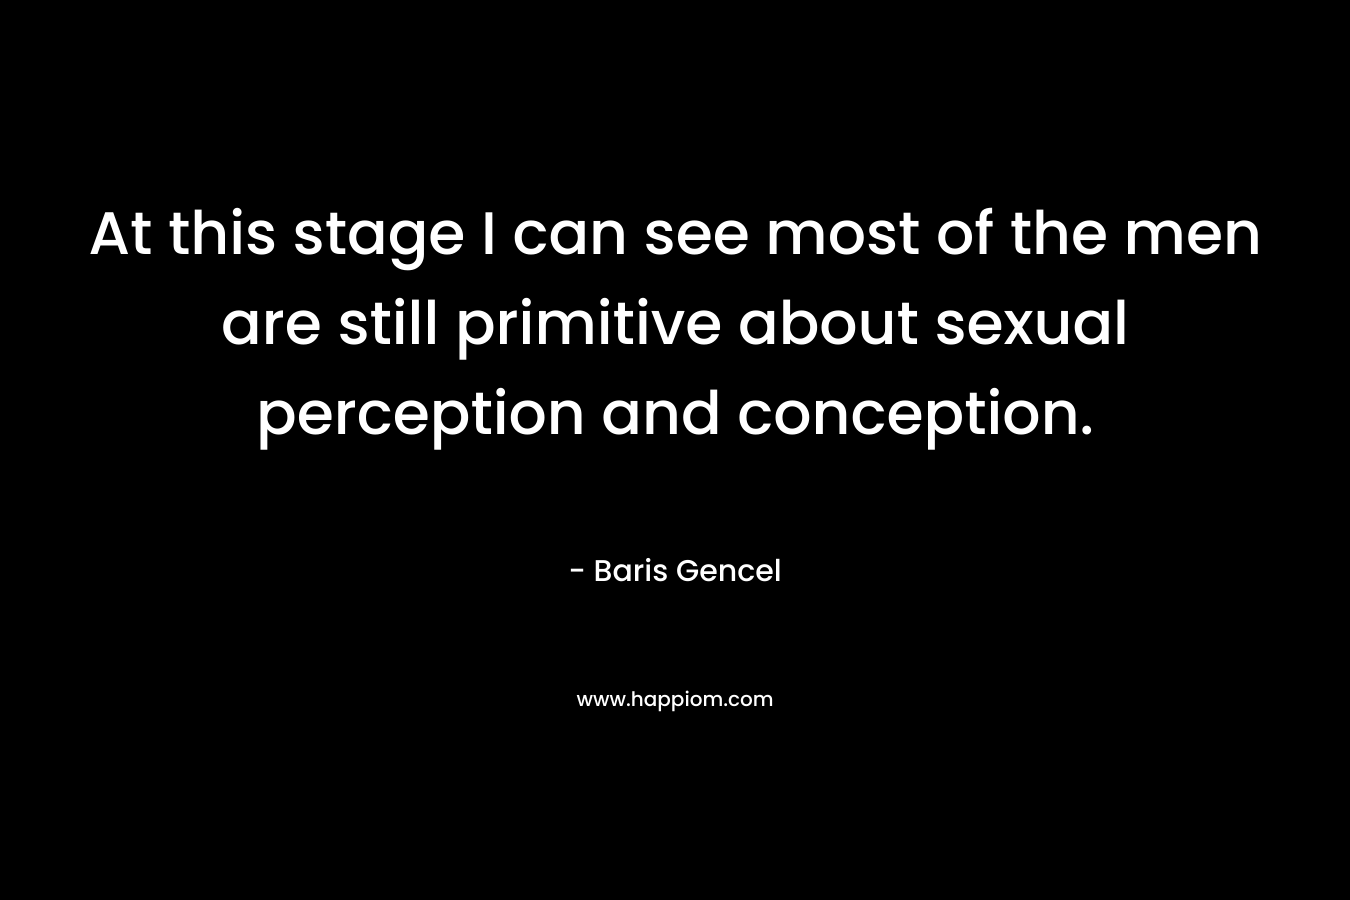 At this stage I can see most of the men are still primitive about sexual perception and conception. – Baris Gencel